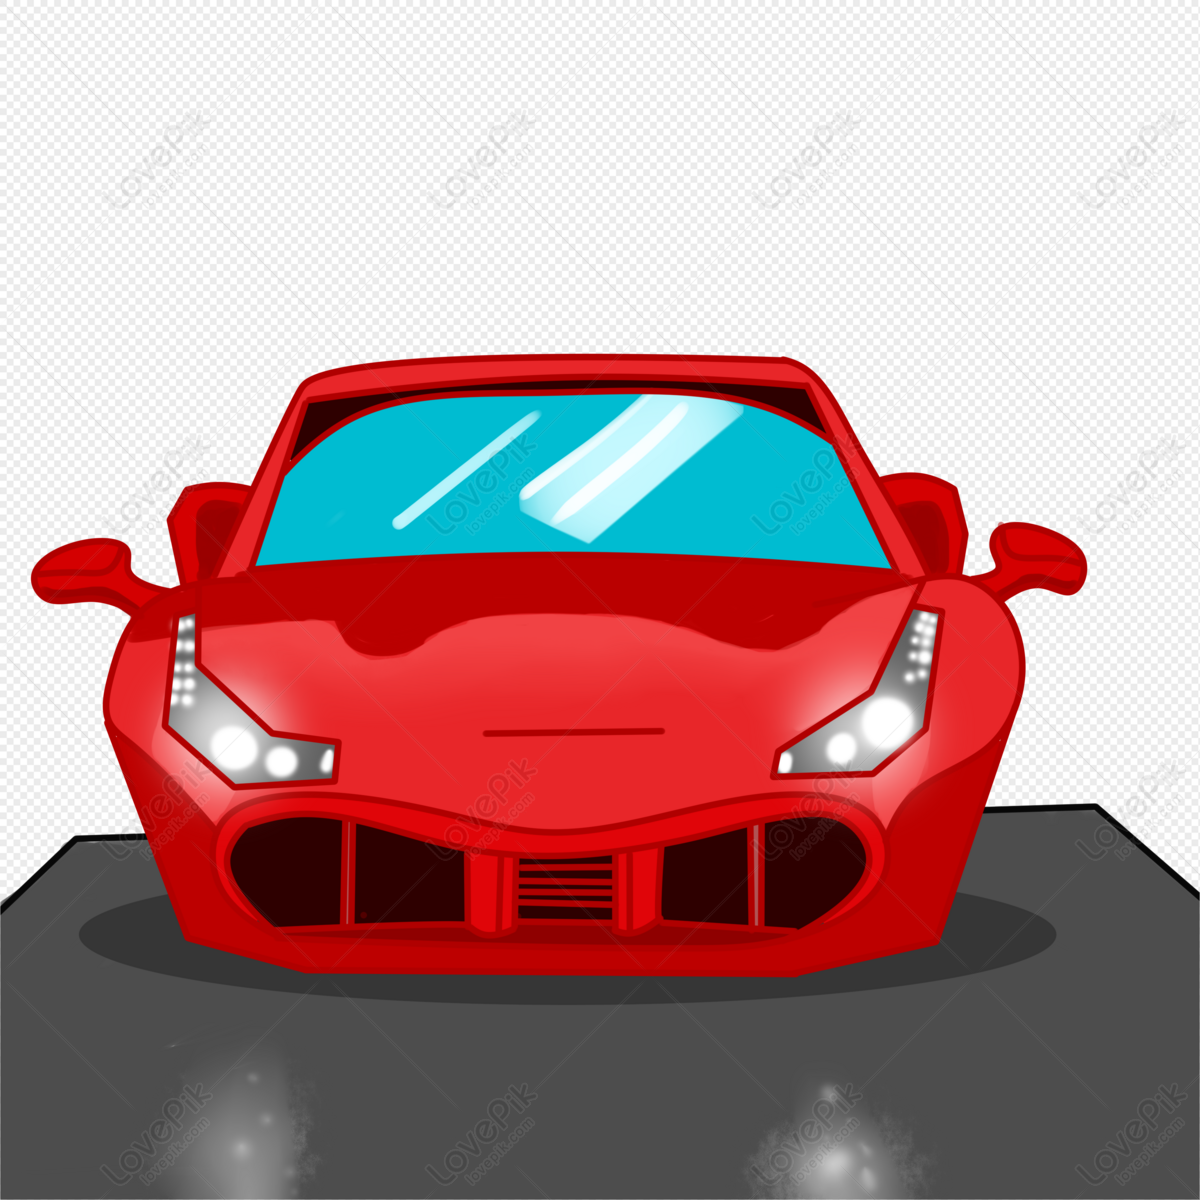 Red Sports Car PNG Image And Clipart Image For Free Download - Lovepik |  401352828